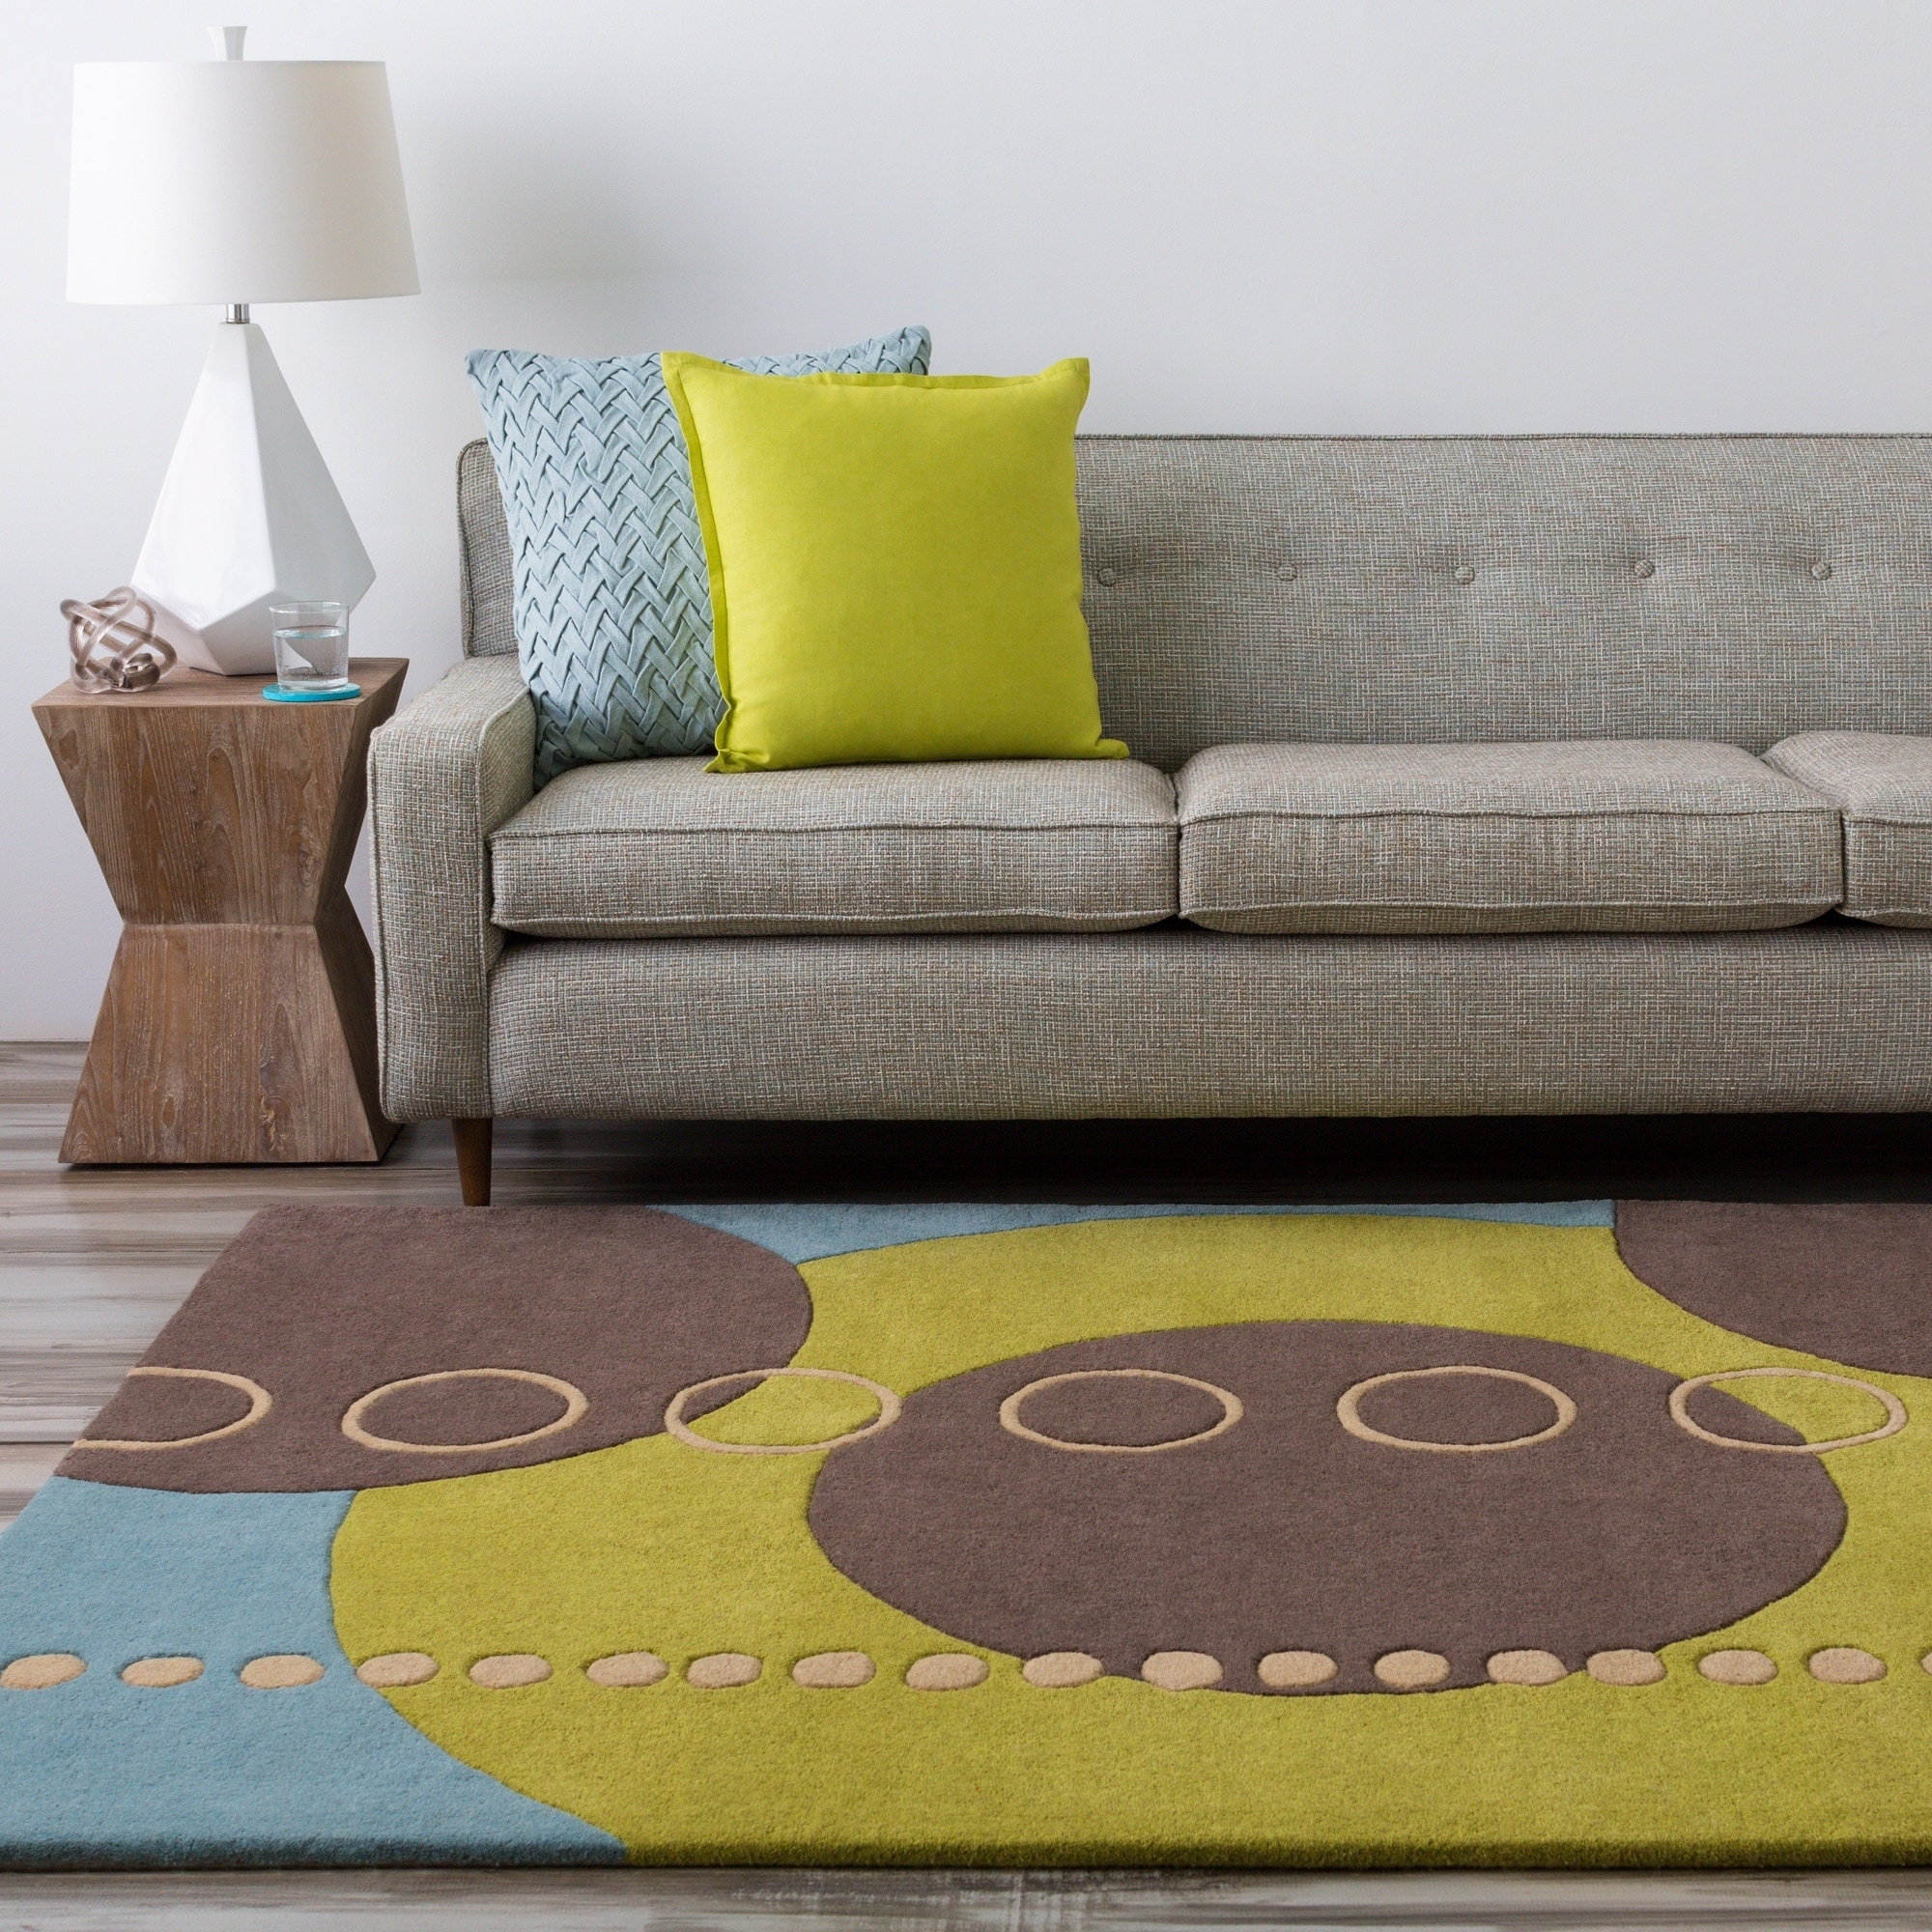 Hand tufted Contemporary Multi Colored Geometric Circles Mayflower Wool Abstract Rug (8 X 11)